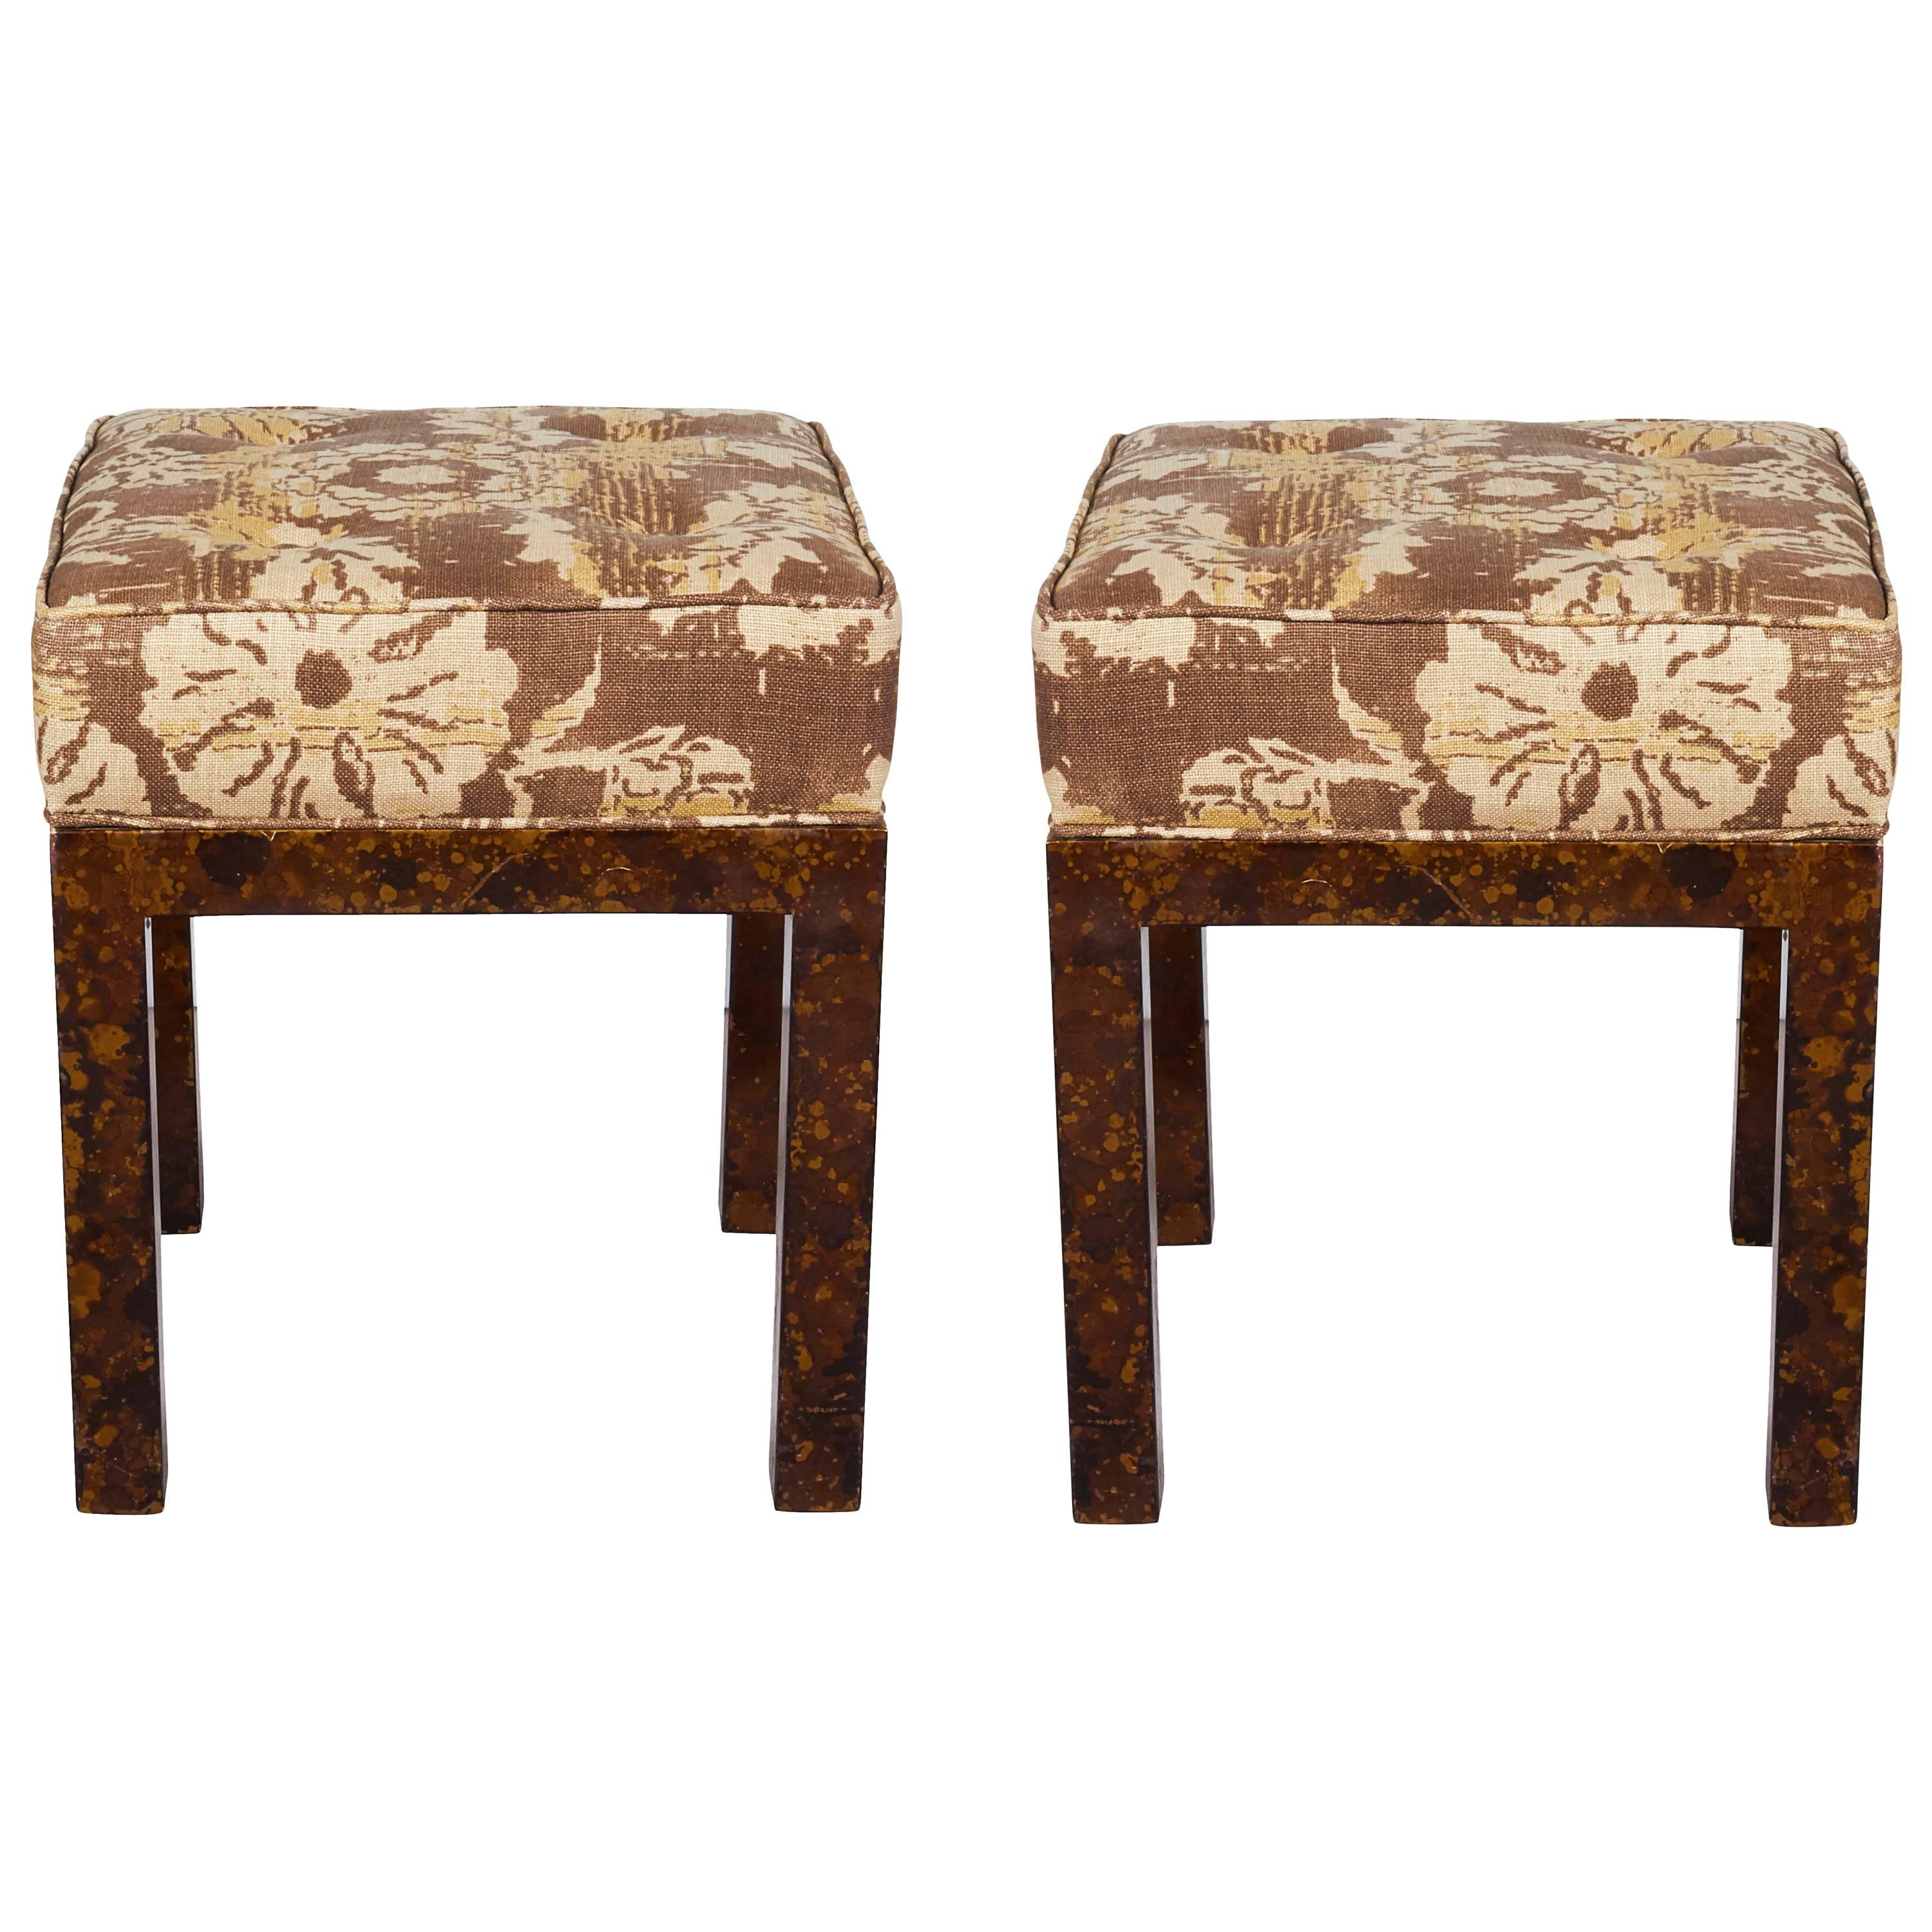 Pair of Parsons Style Faux Tortoise Shell Benches with Floral Linen Seats